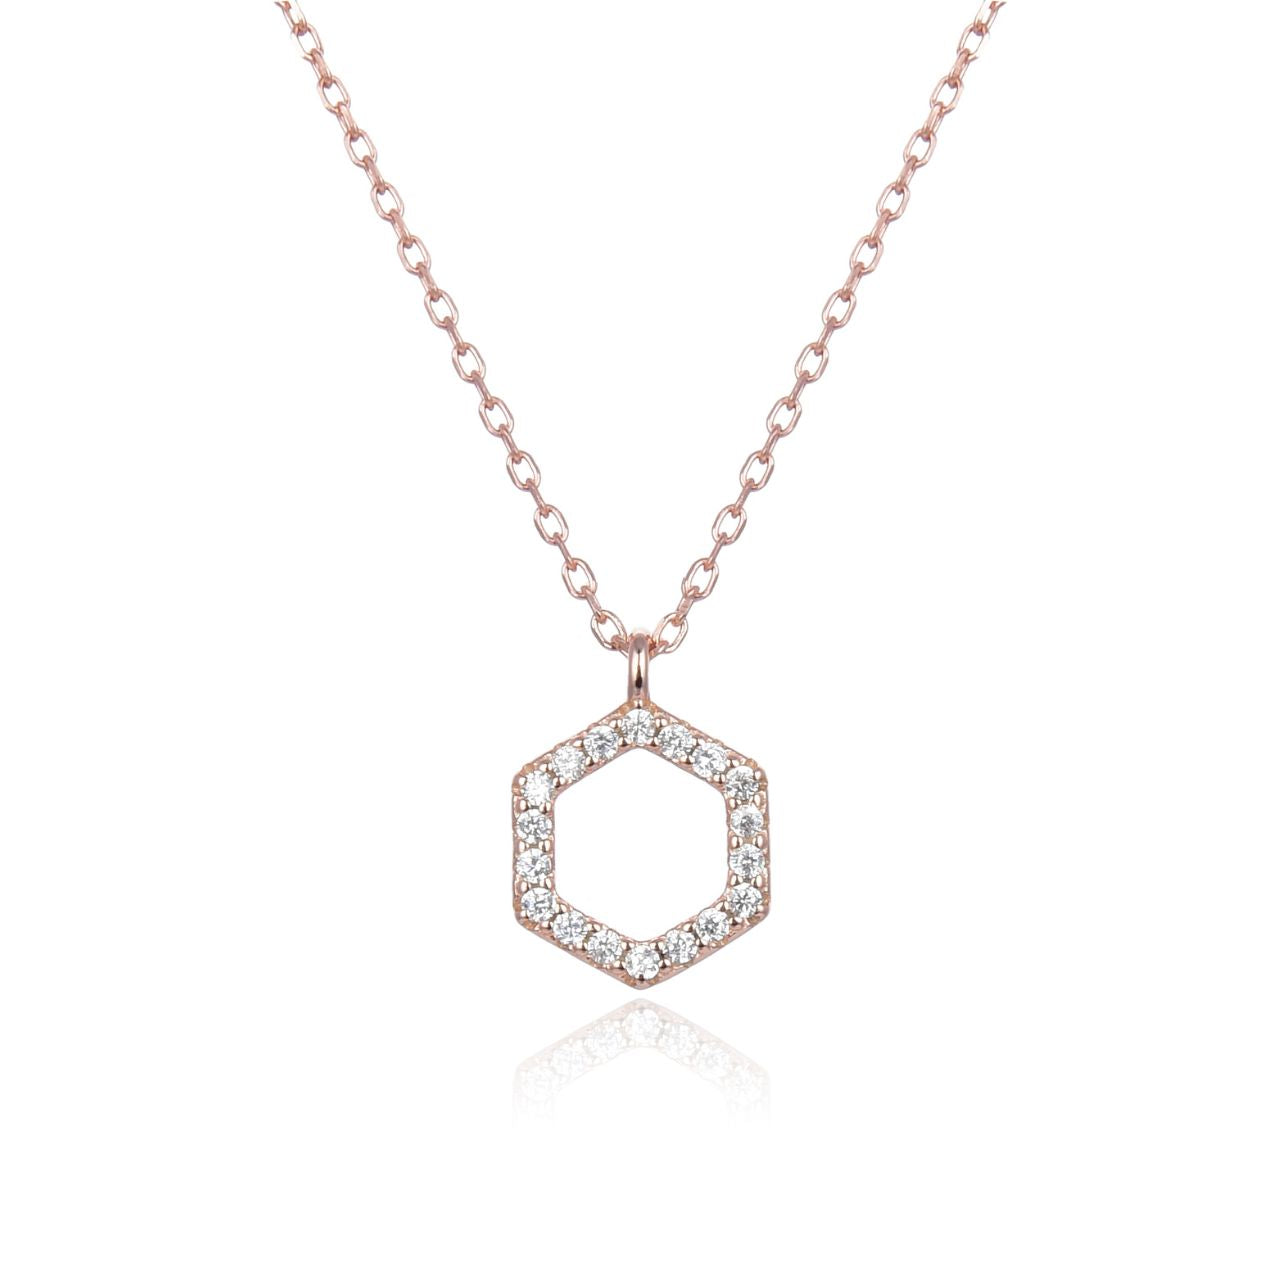 Rose Gold Hexagonal Necklace by Kilkenny Silver  Rose gold plated sterling silver hexagonal necklace with cubic zirconia stones.